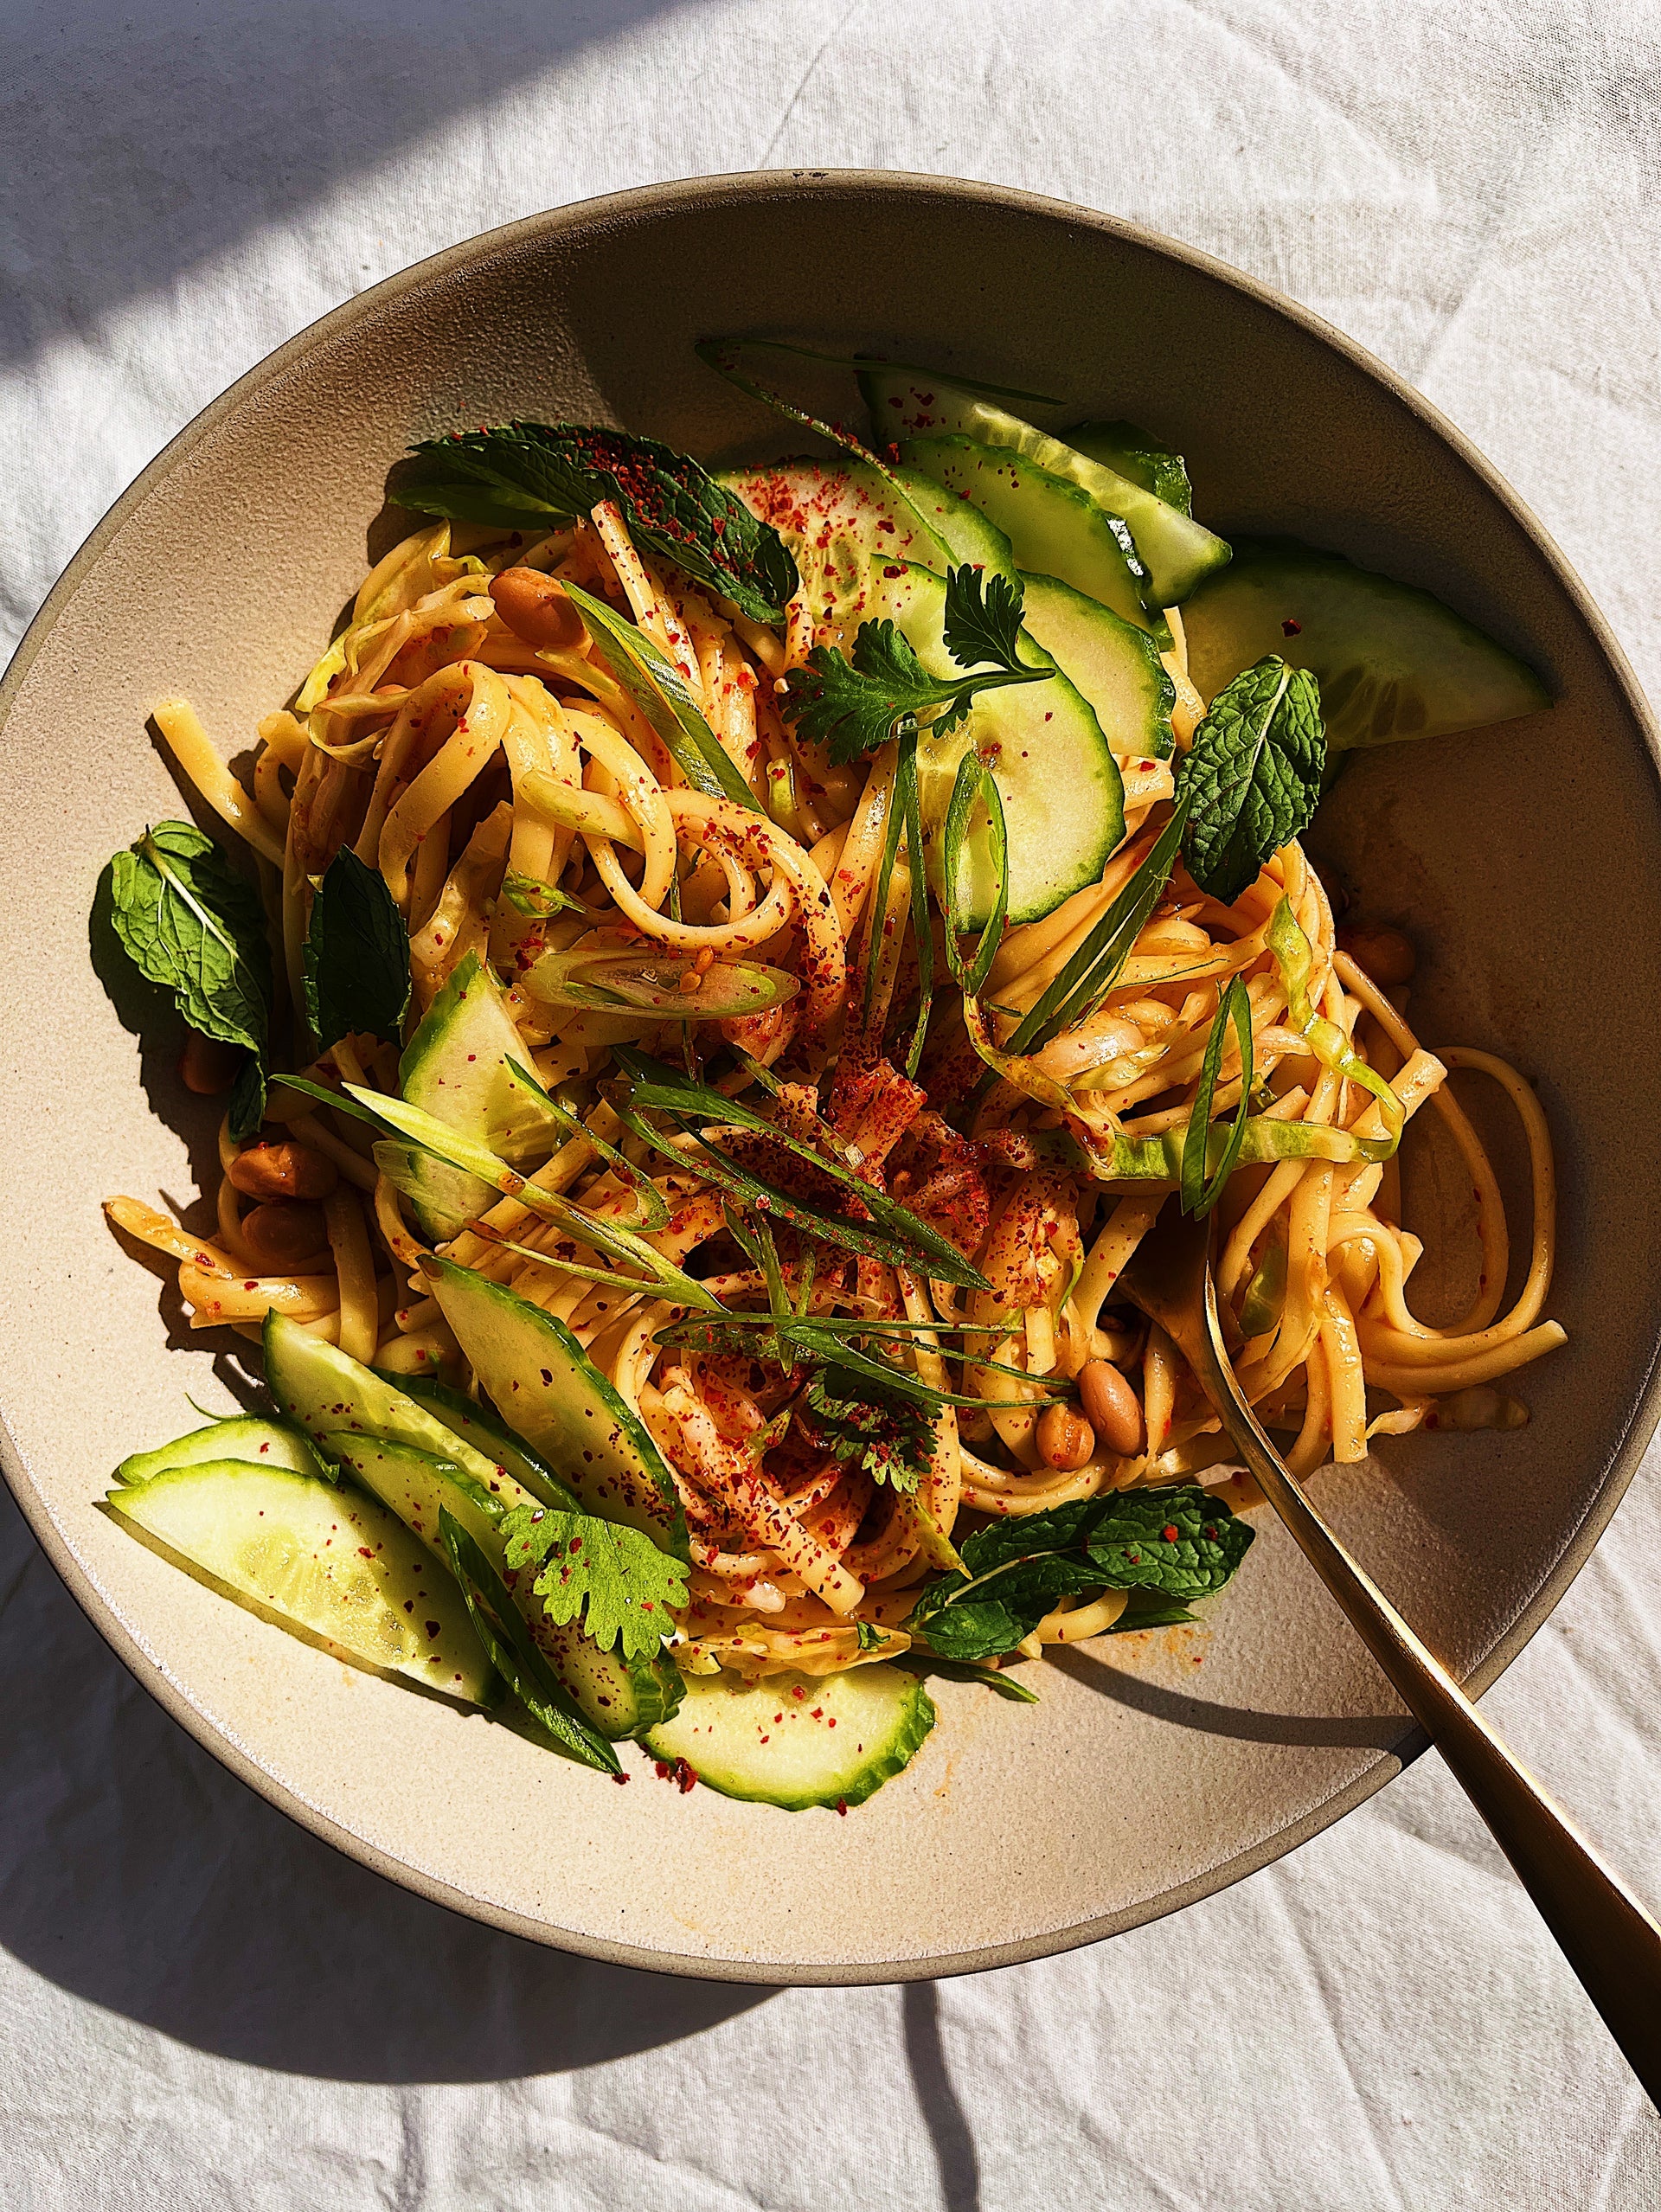 Heyday Before Payday: Kimchi Bean Noodles With Zingy Cabbage